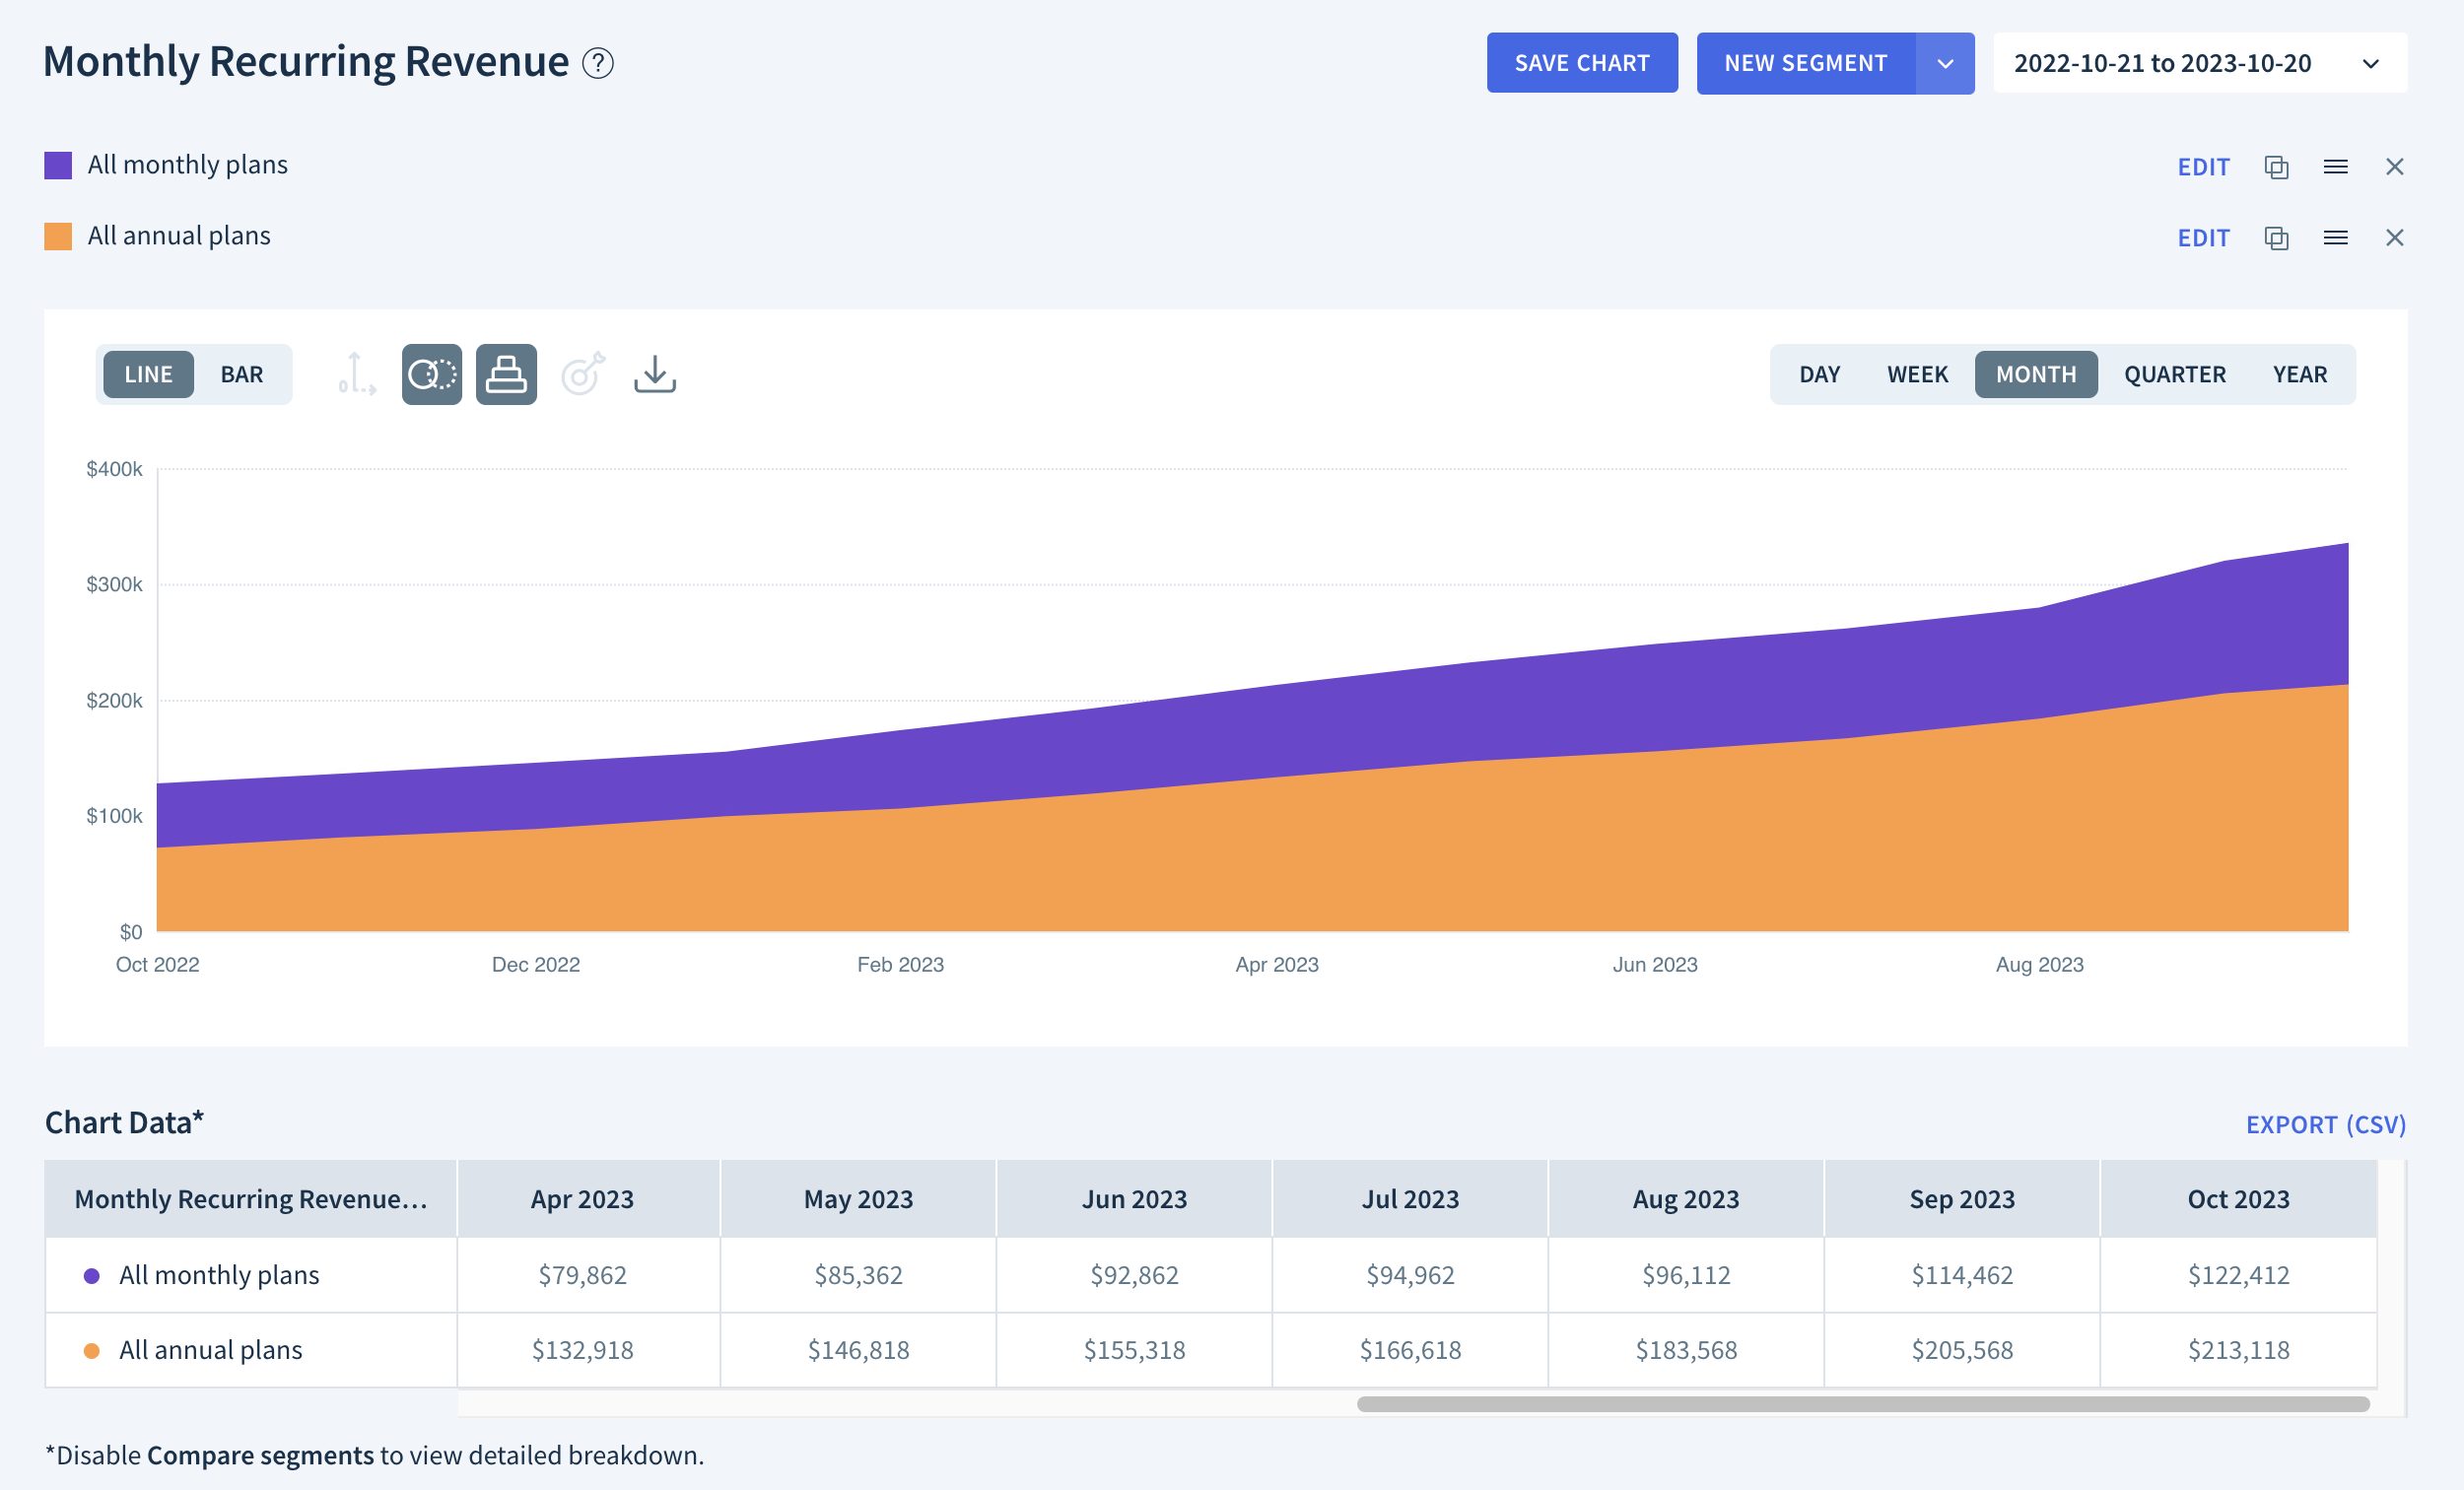 Screenshot of the Monthly Recurring Revenue chart comparing two segments: All monthly plans, and All annual plans.